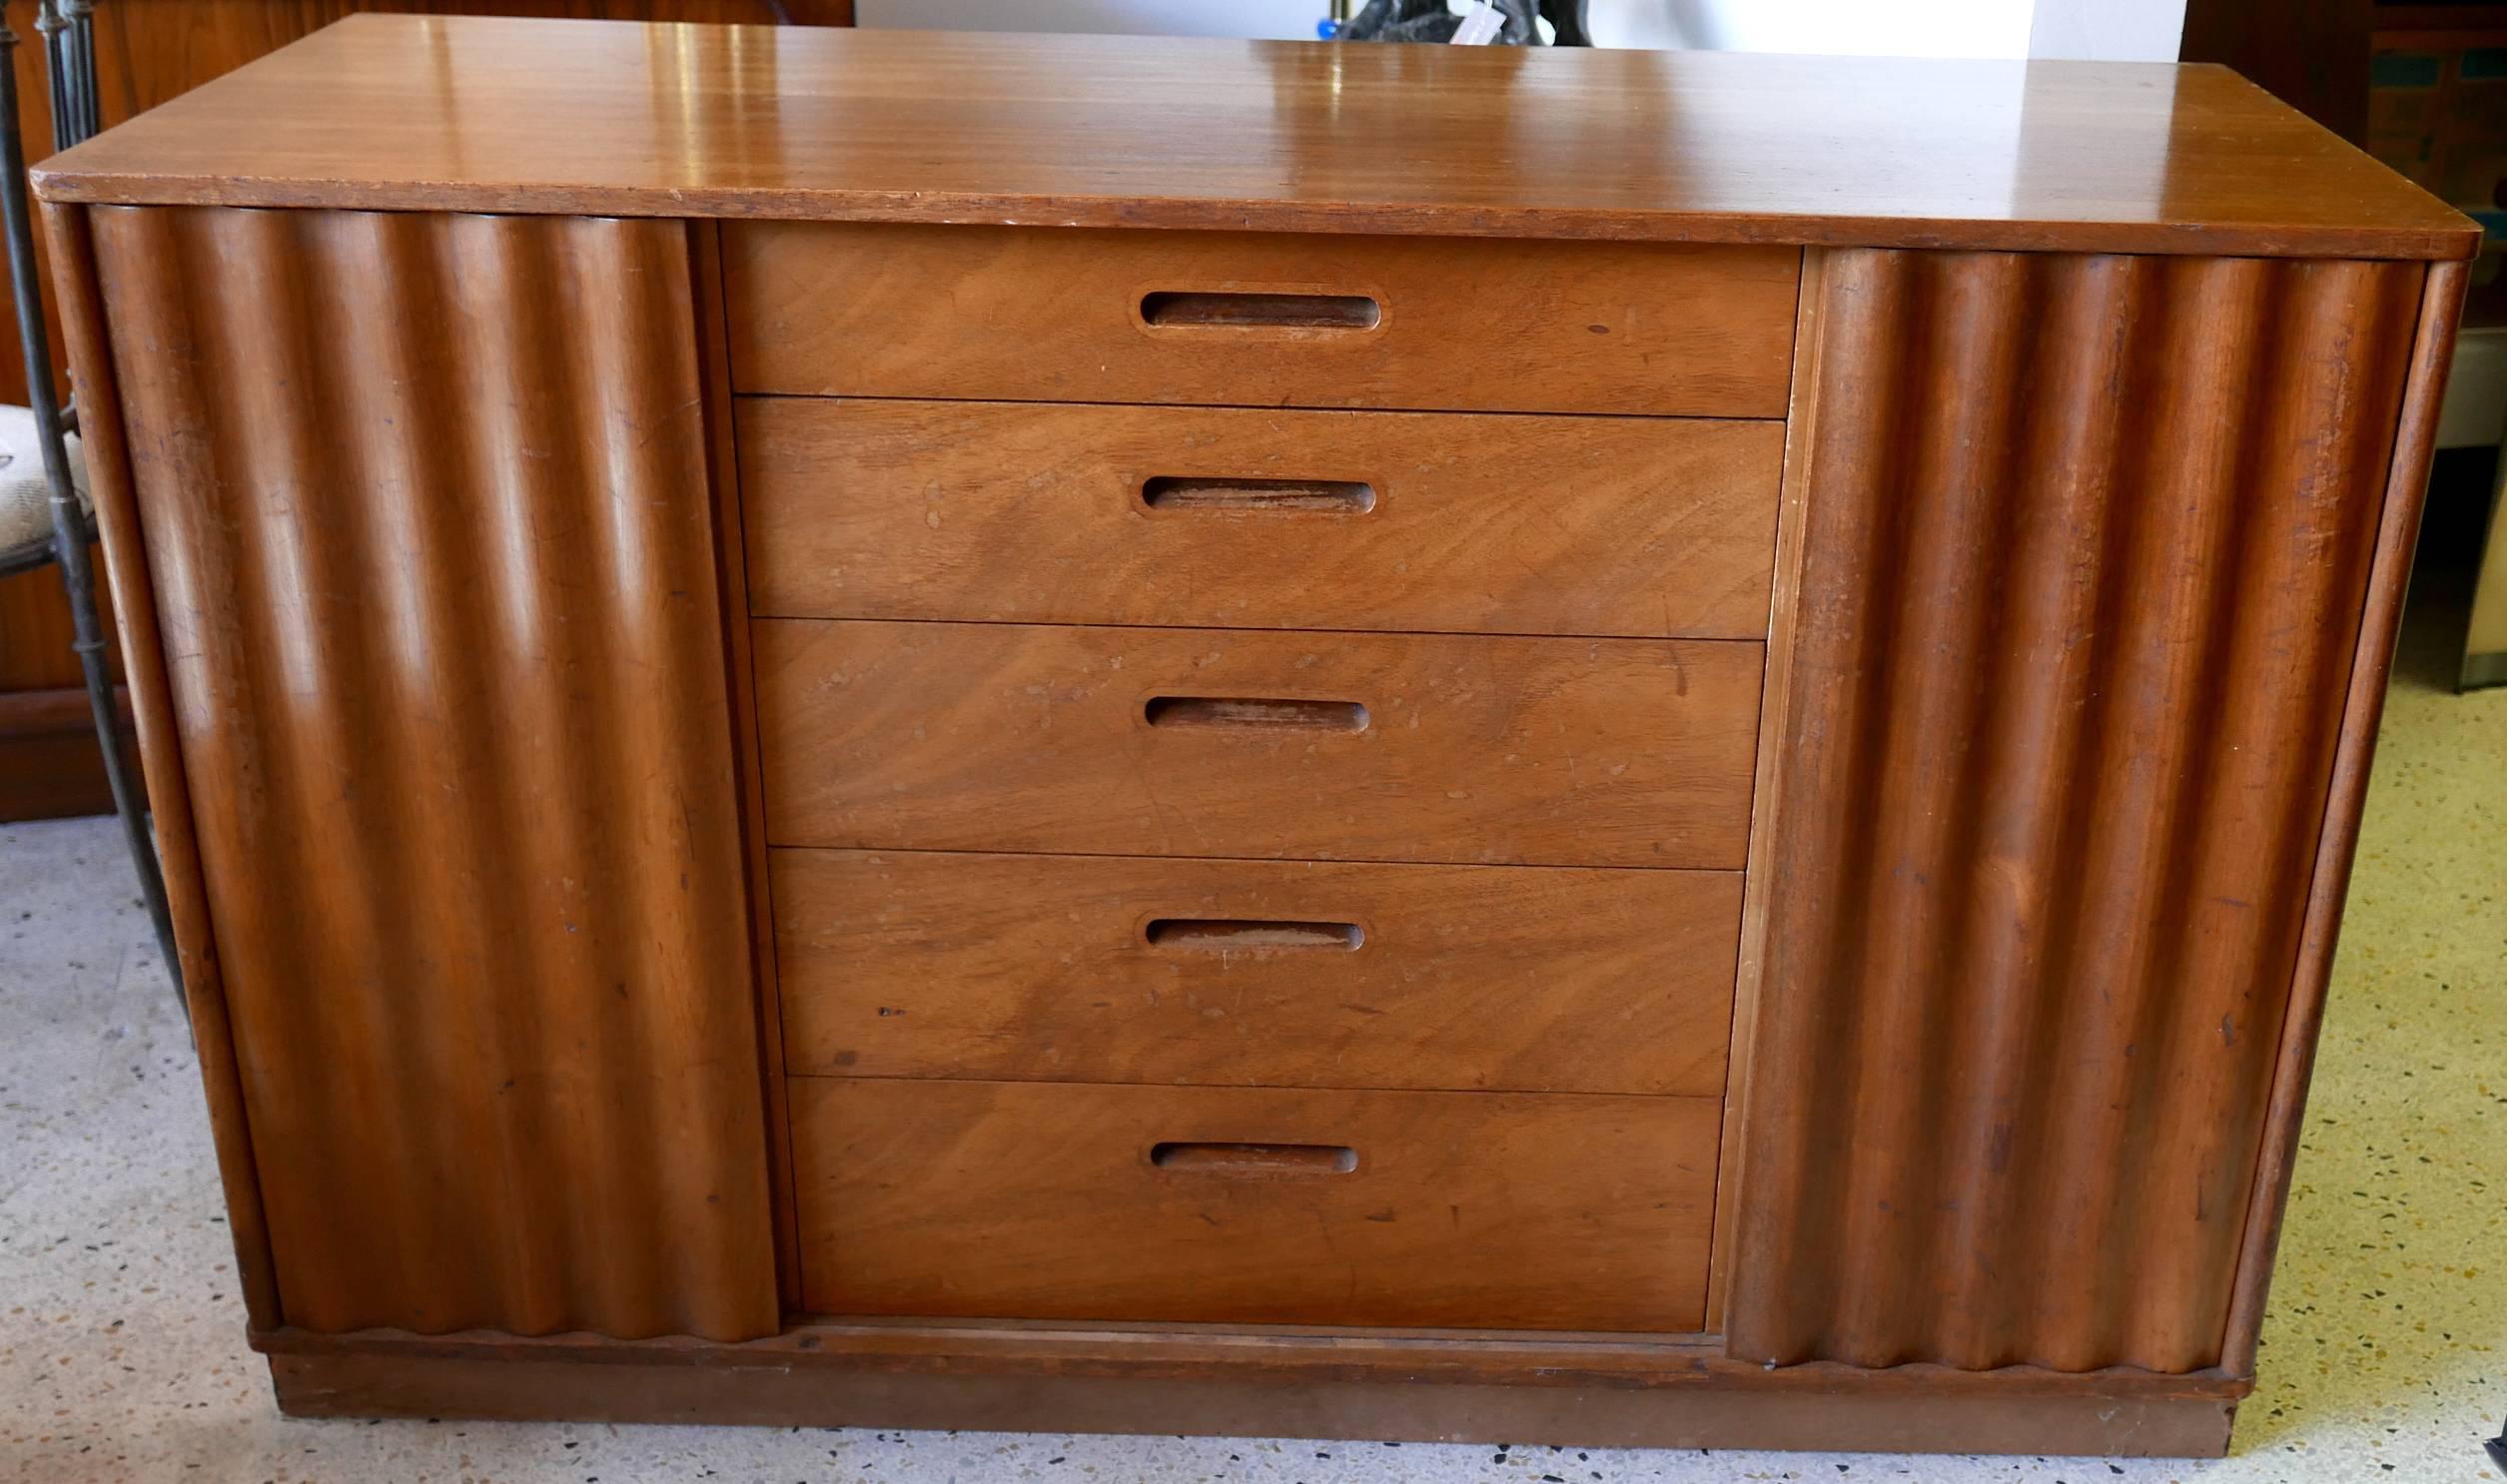 Edward Wormley designed this credenza for Dunbar, circa 1950s. Unique to his design, the sliding accordion front doors can work from the middle, inside out, or from the outside in. A strikingly sophisticated piece of highly-function midcentury